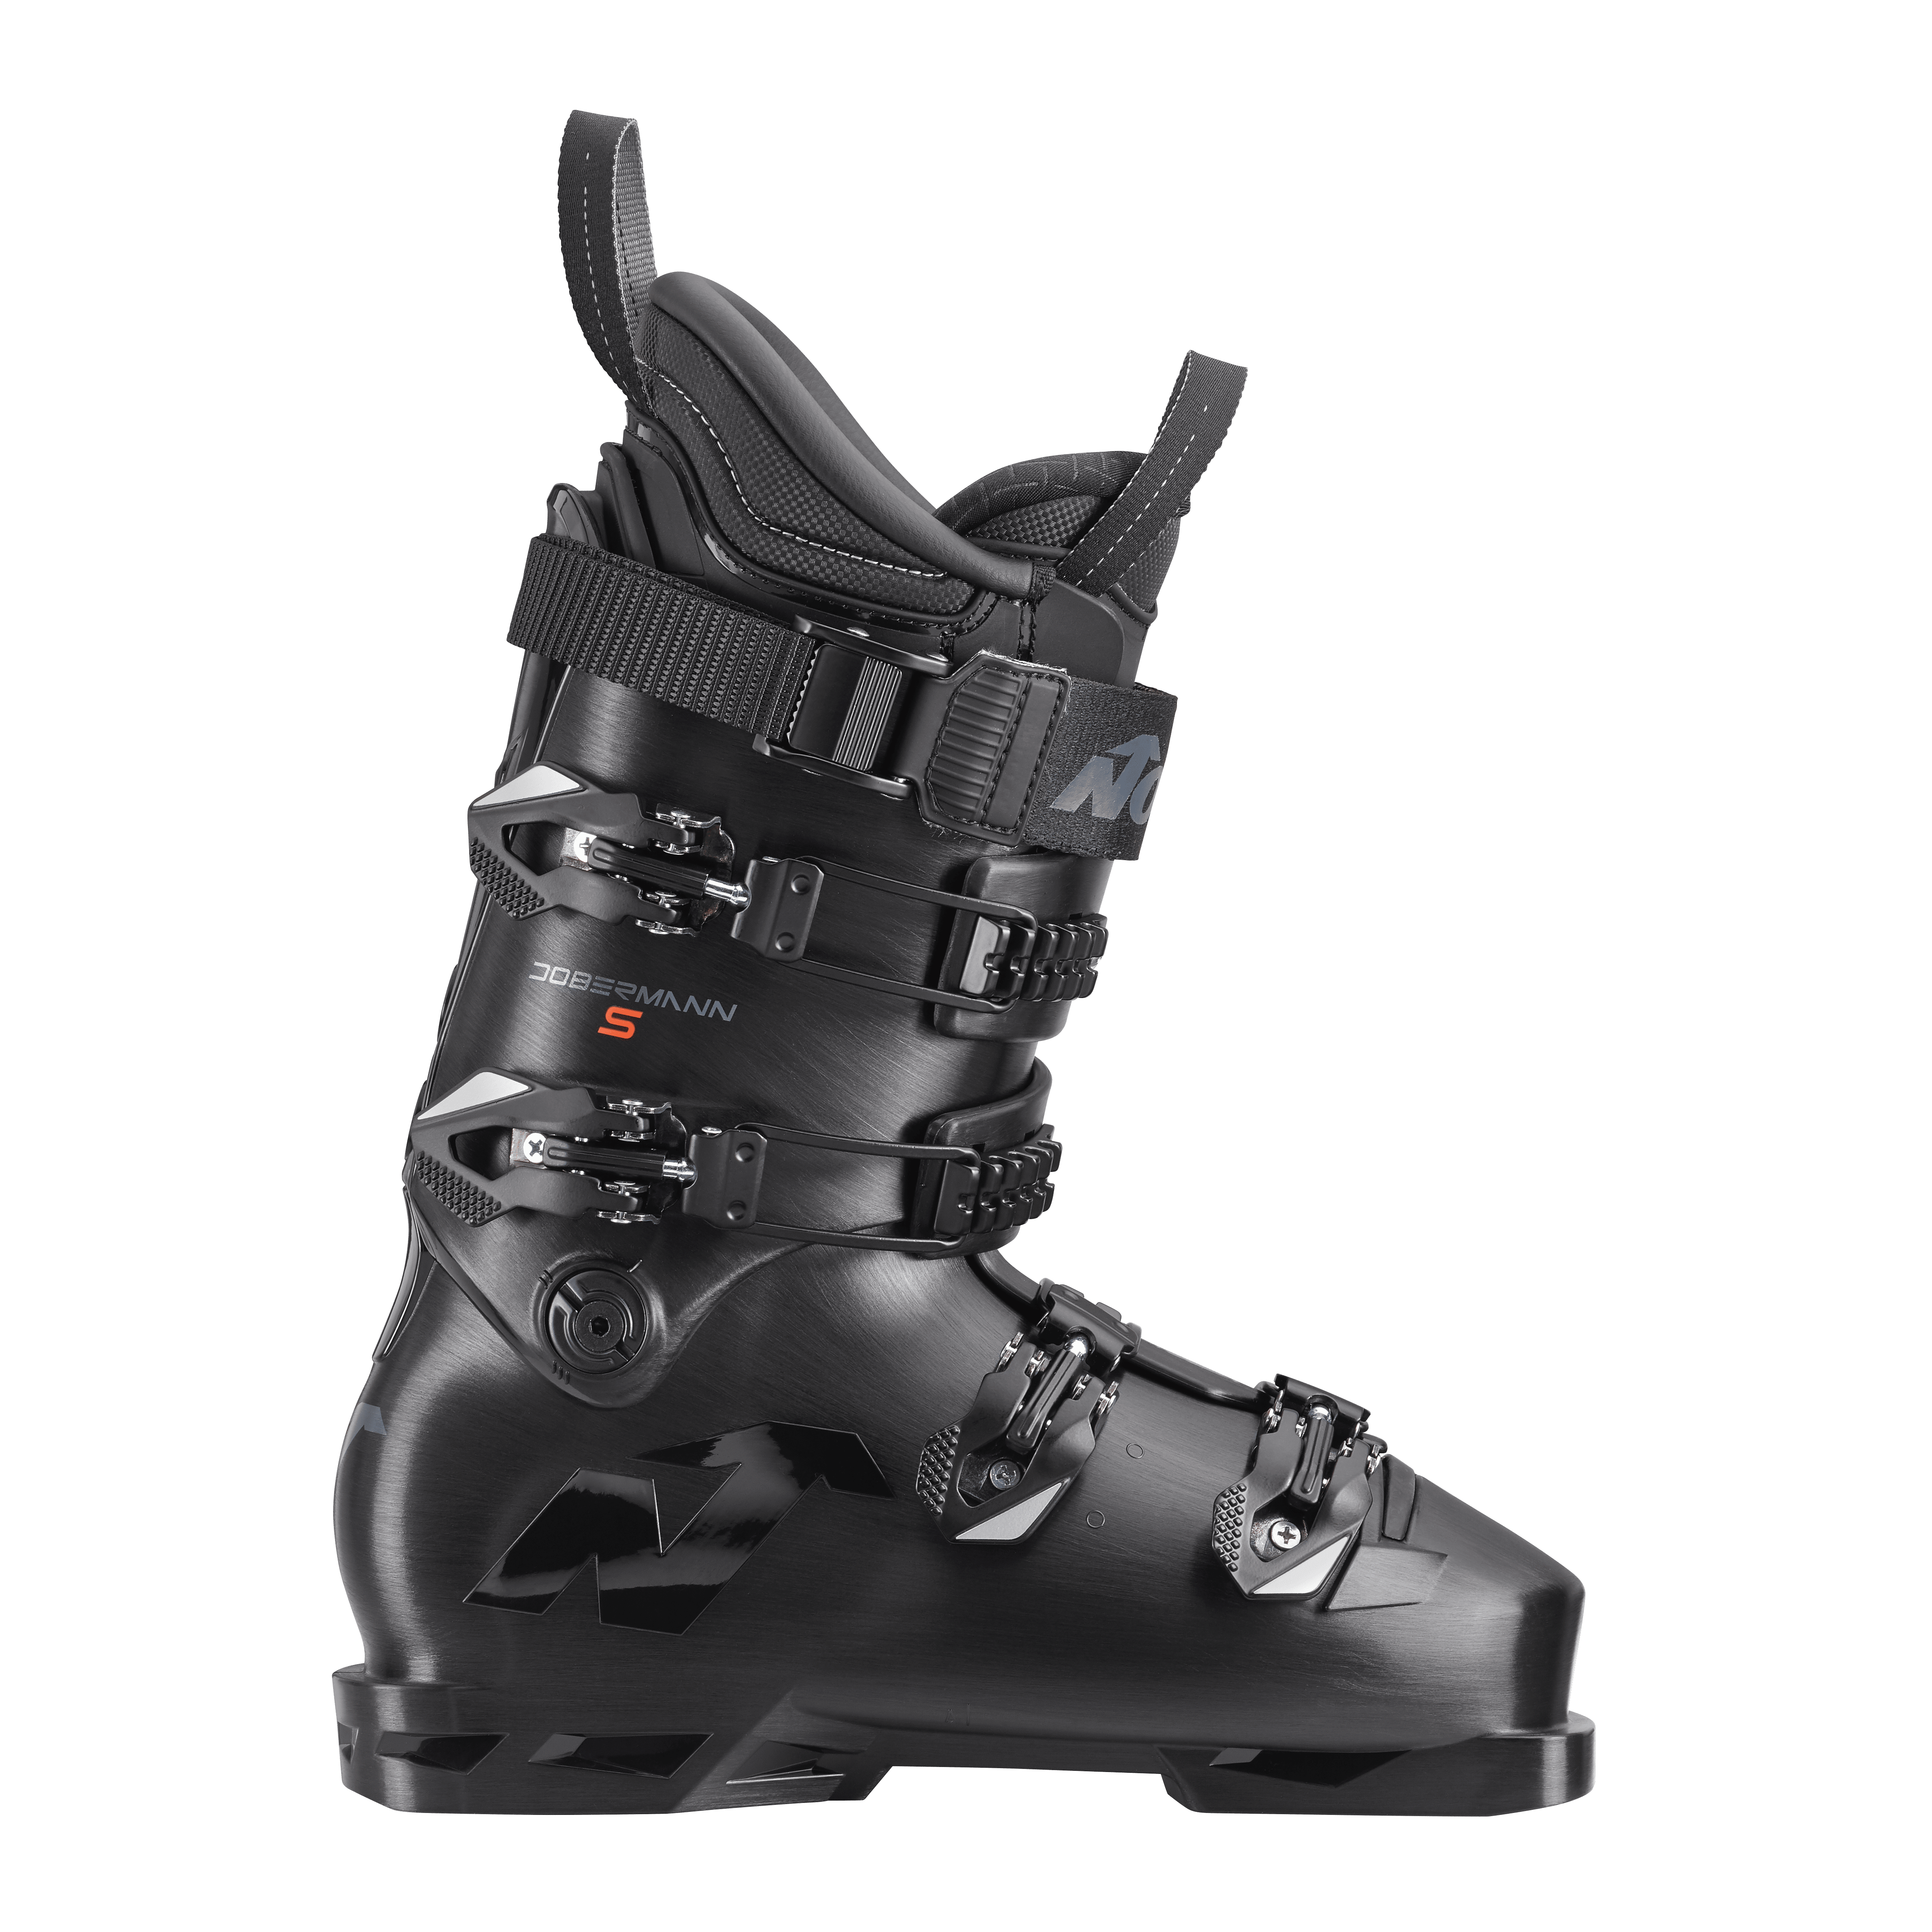 Dobermann 5 Nordica - Skis and Boots – Official website